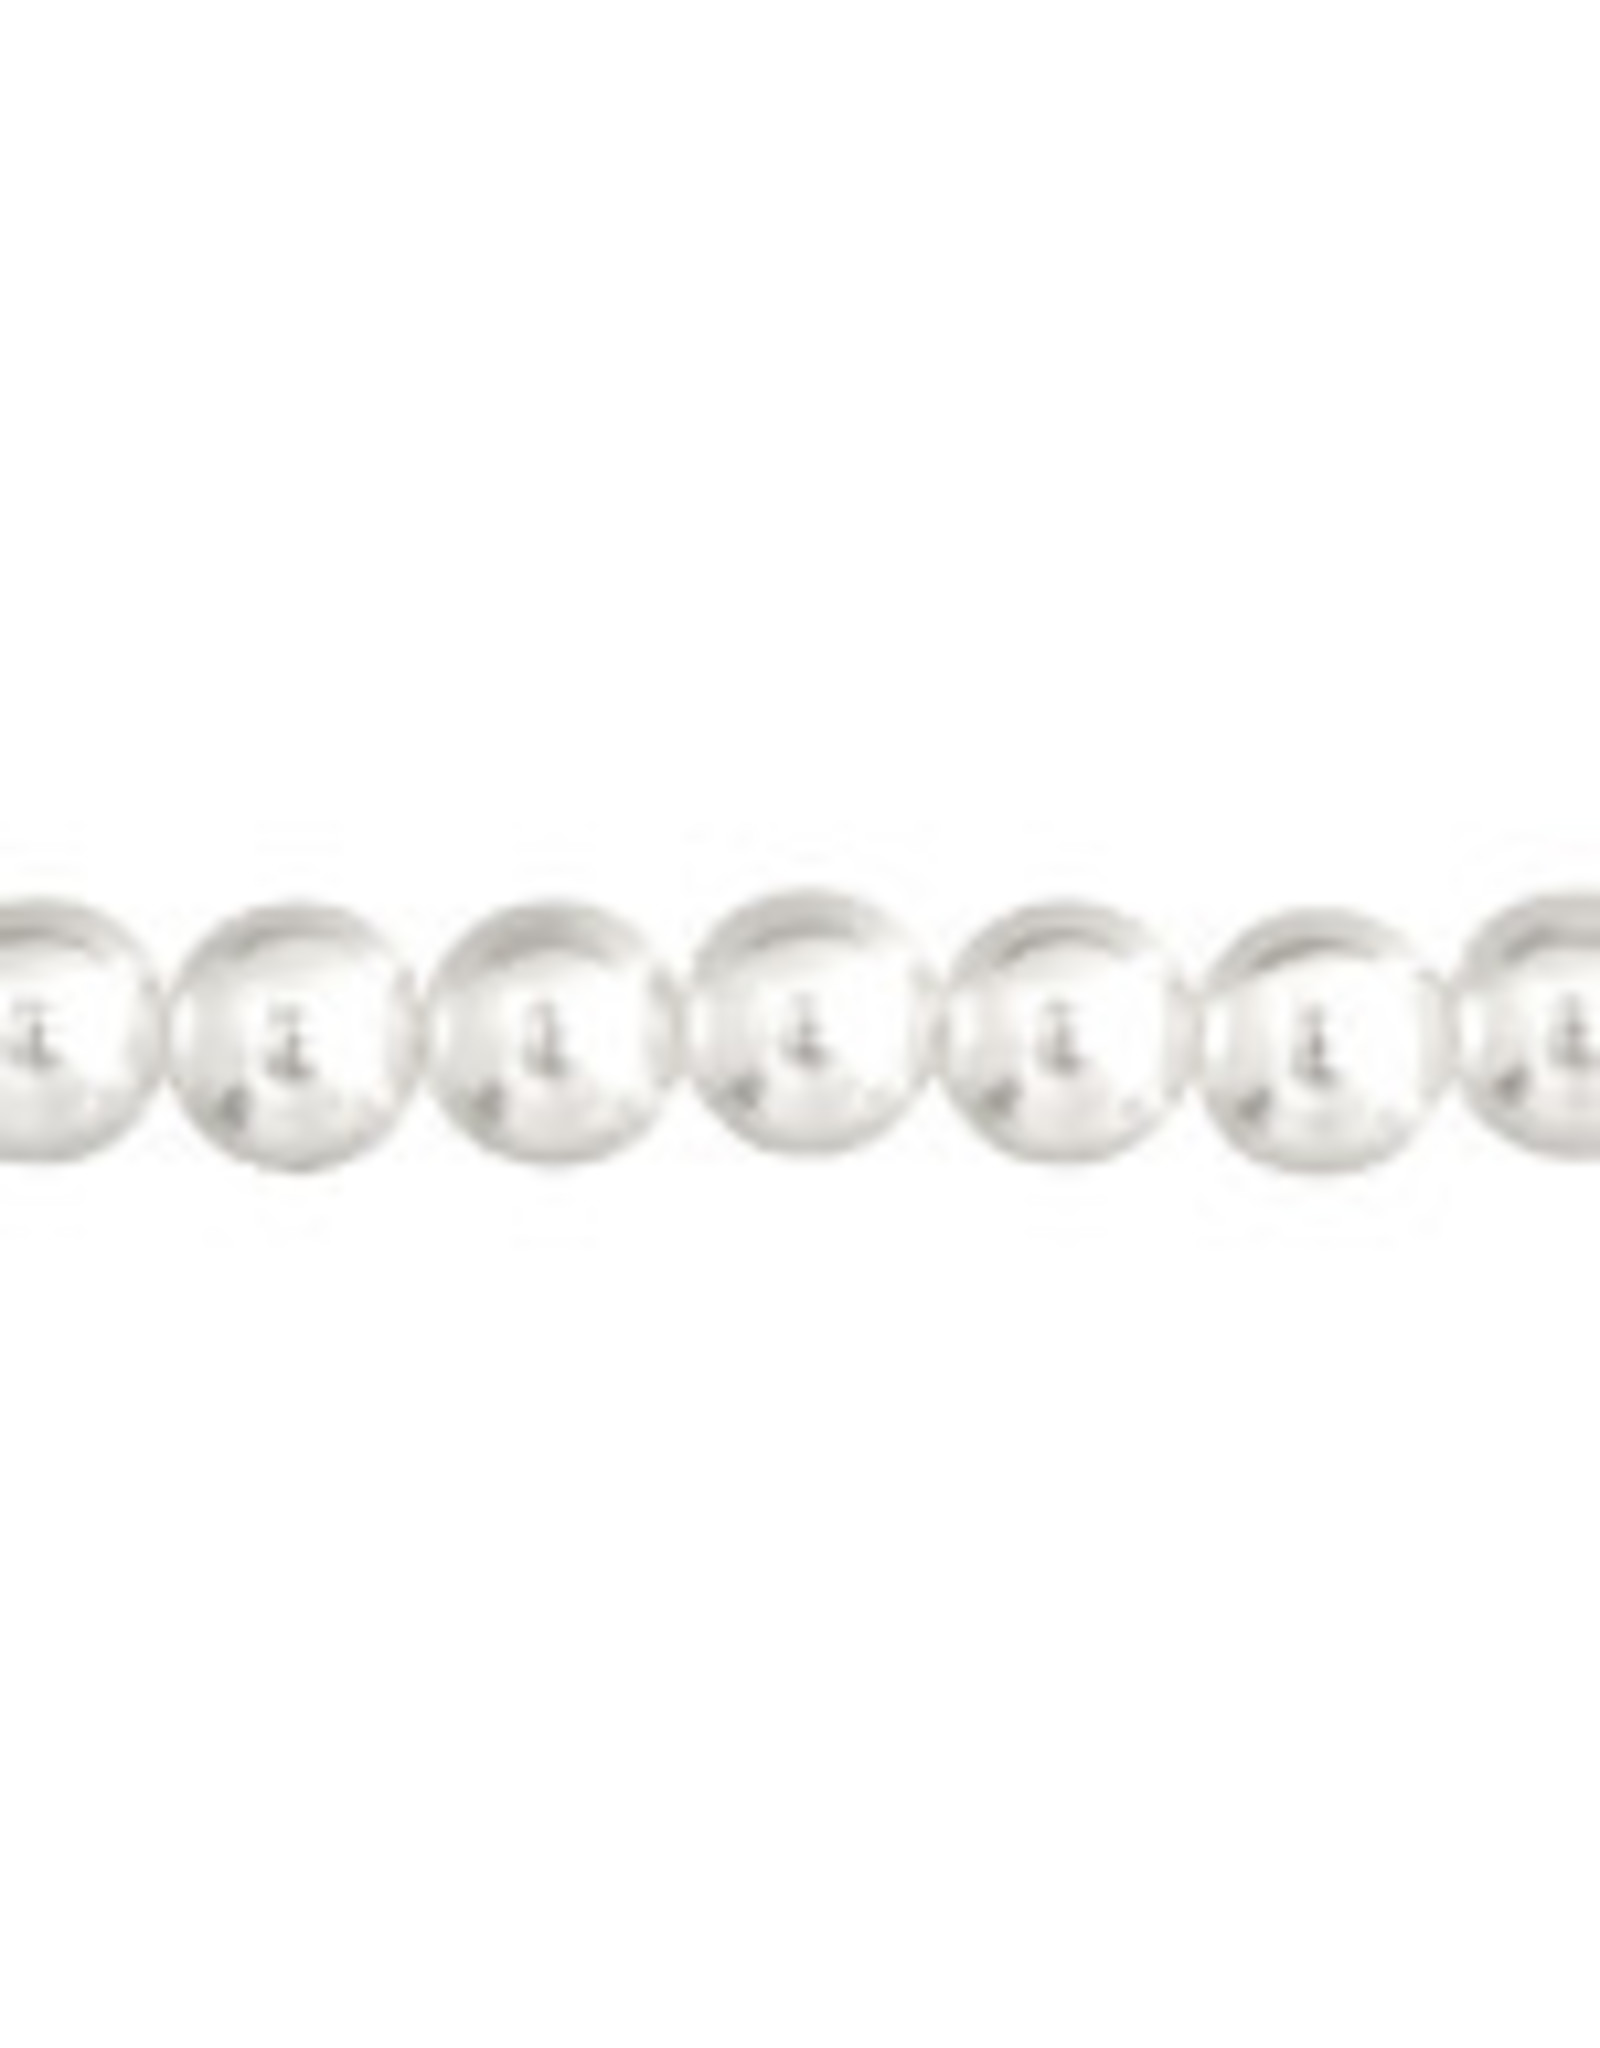 Craft Pearls 5mm White x150 - Strung Out On Beads